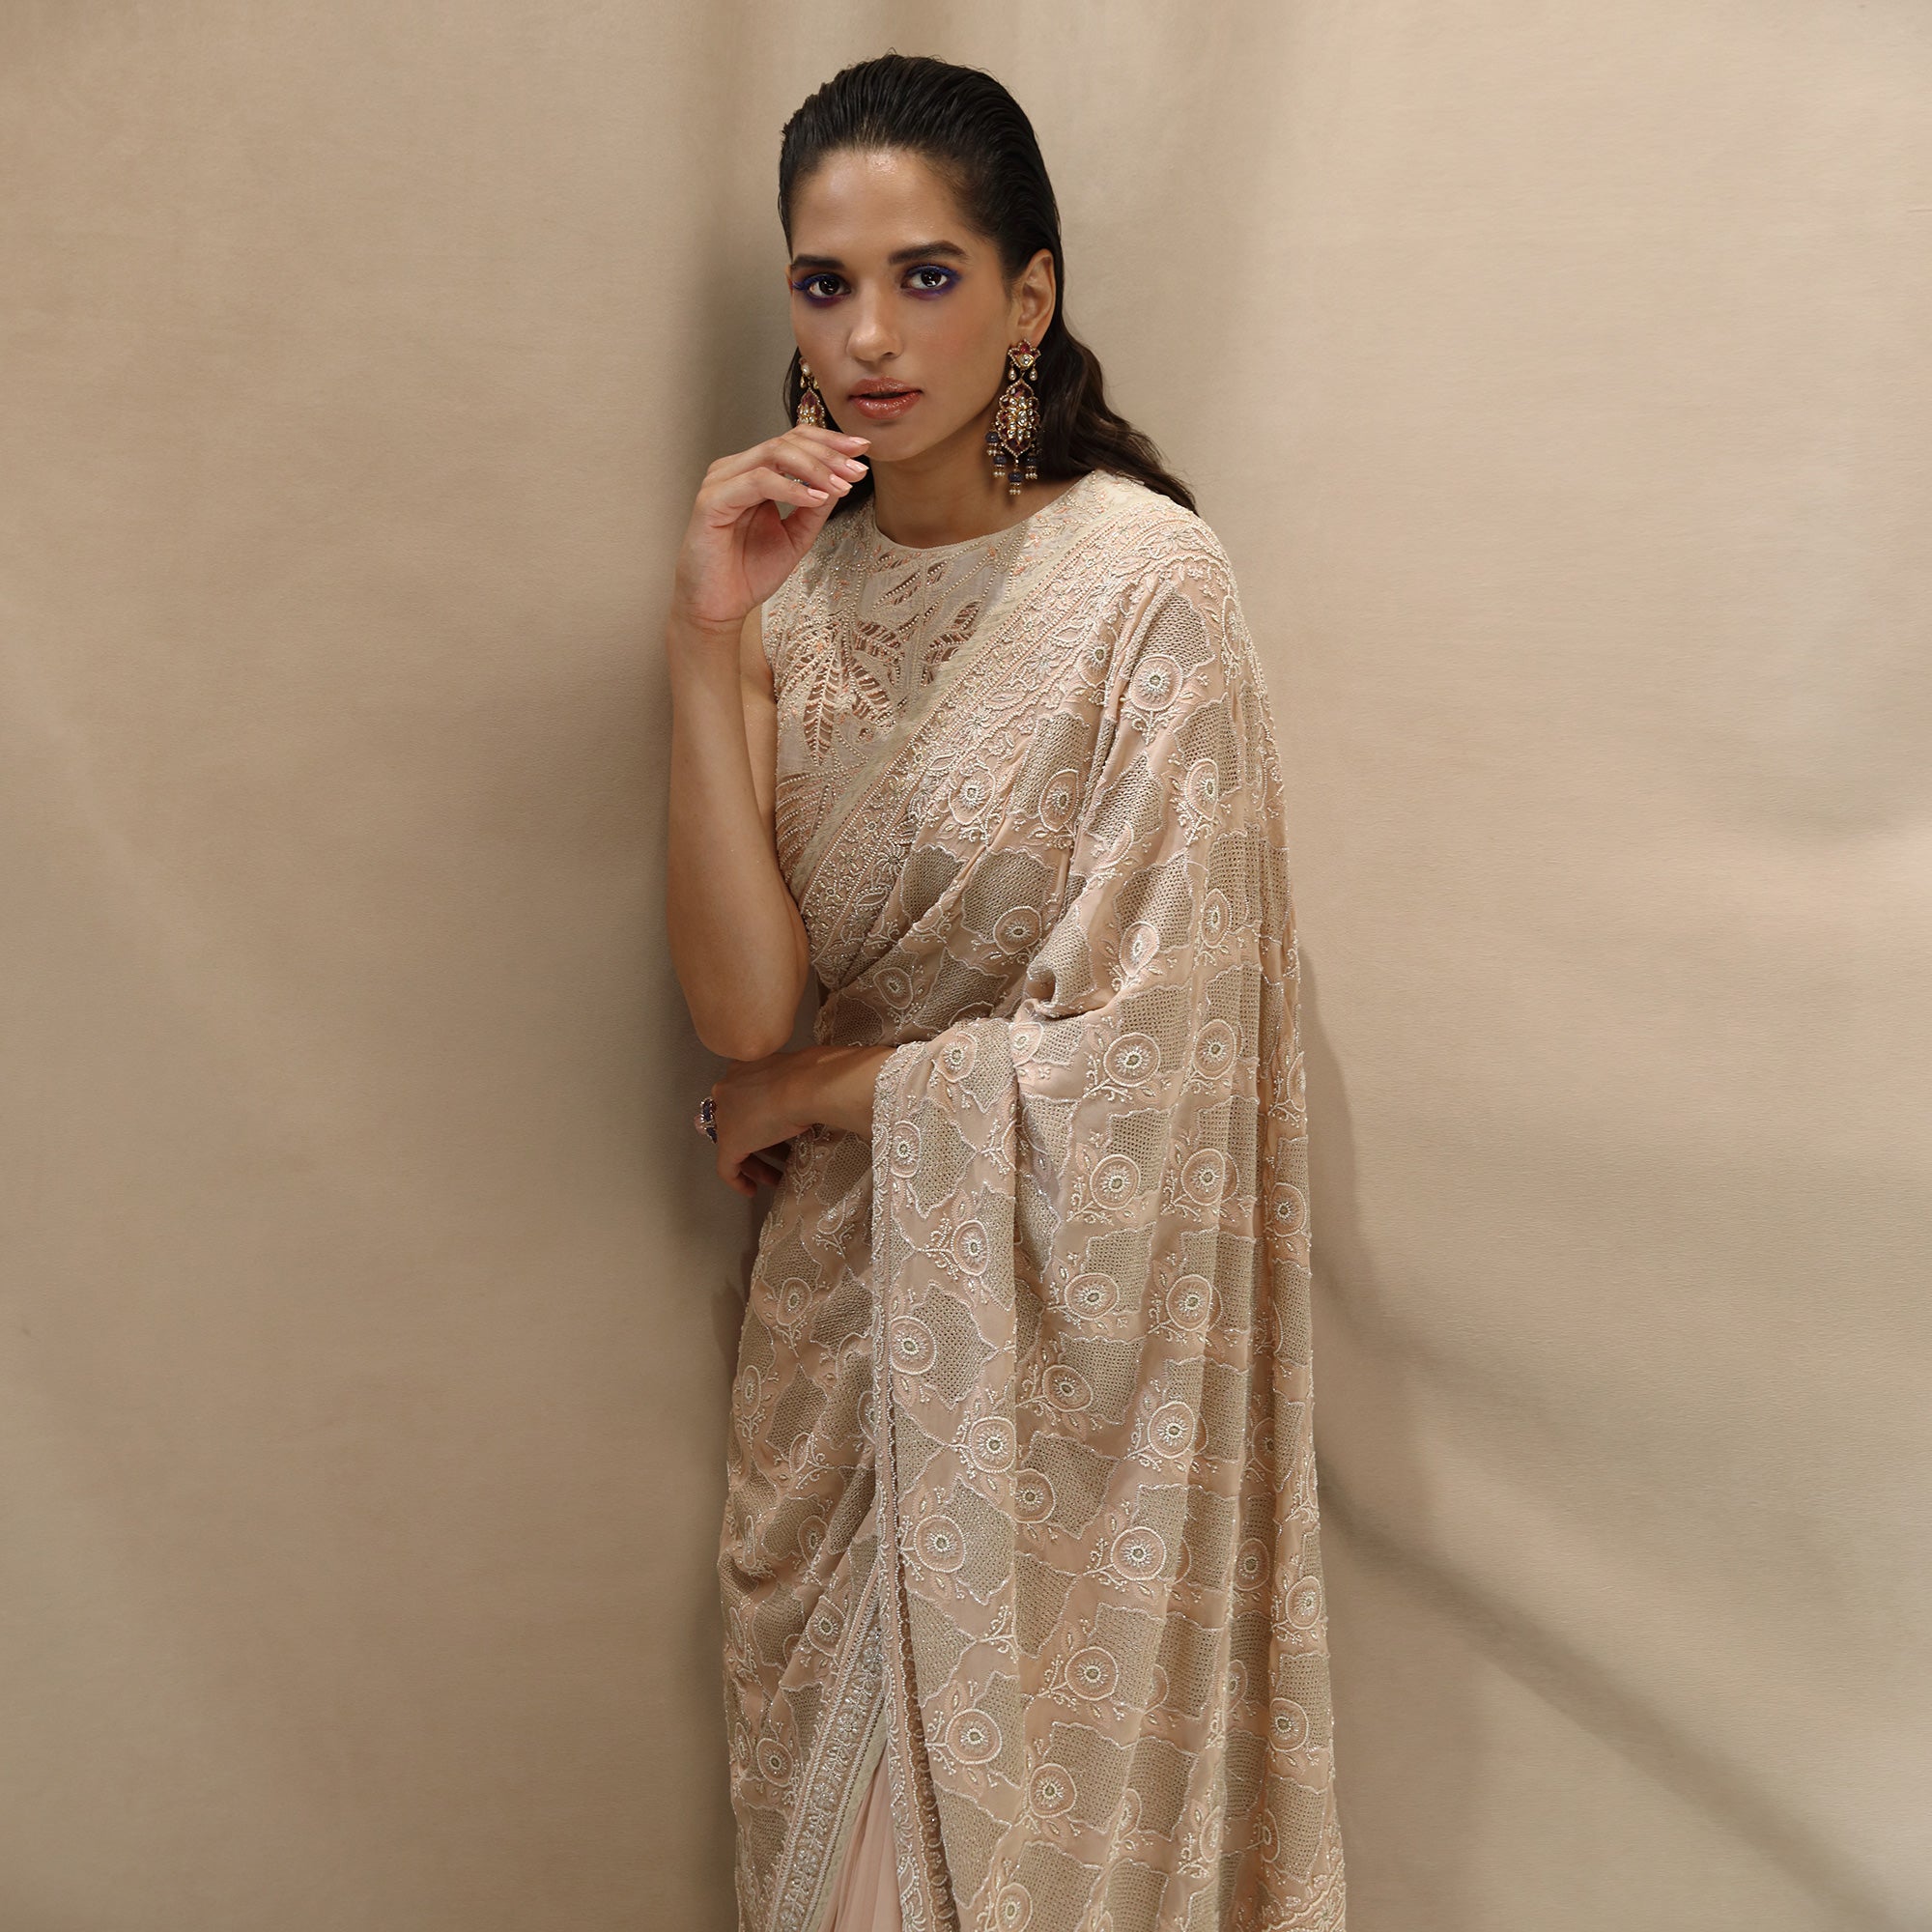 Fine chikankari saree with intense zari jaali detailing and intense pearl embroidery, teamed up with net applique embellished blouse. The saree has an intense display of fine chikankari craftsmanship. The palla has beautiful zari jaali work all densely done by the craftsmen from Lucknow showing the finest of skills. #Abhishekstudio #abhisheksharma  #fashiondesignerabhisheksharma #designerware #ambawattaone #lakmefashionweek  #weddingware #bridal #modrenbride #chikankari